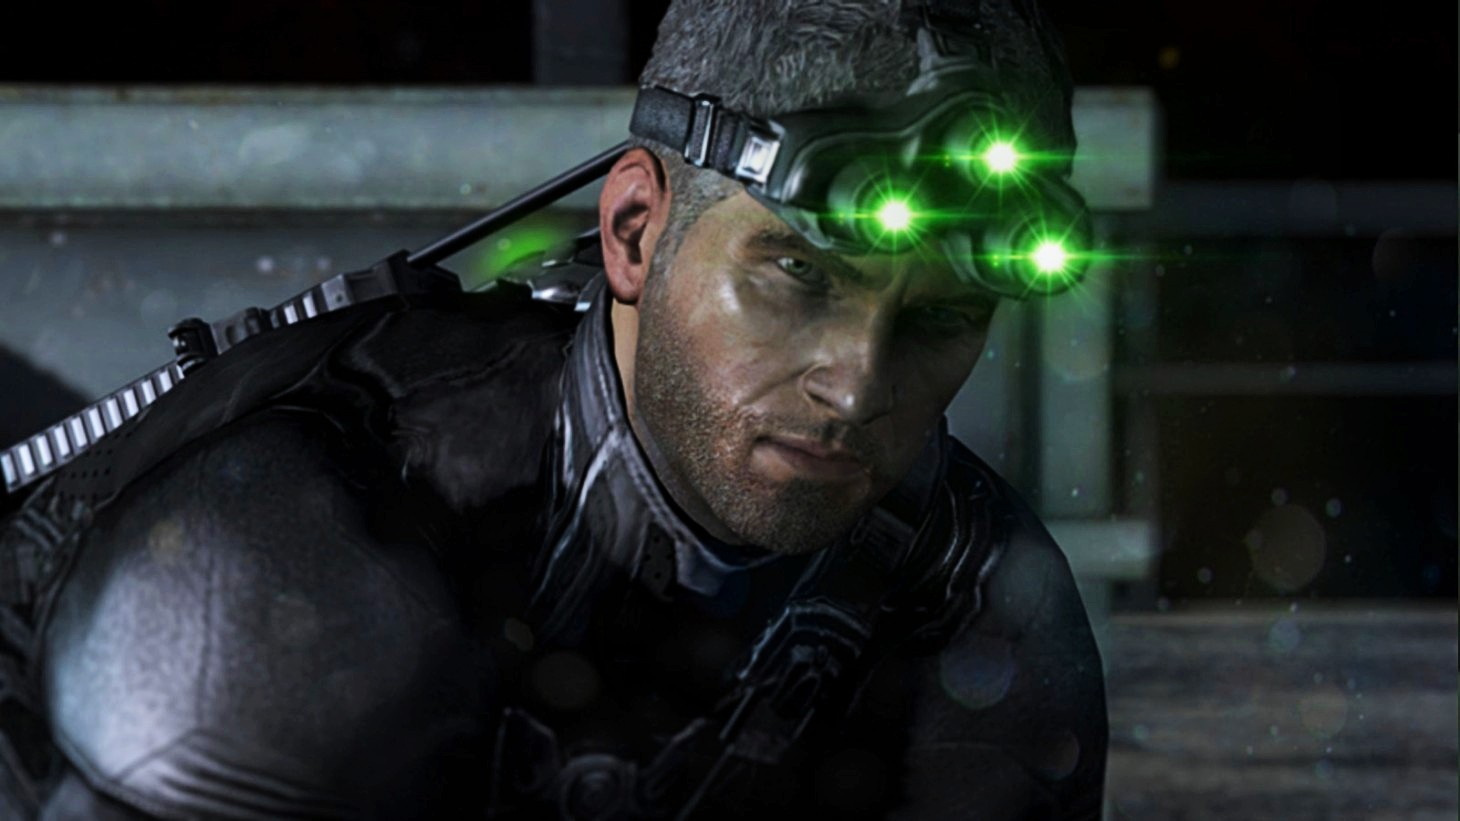 The Splinter Cell Remake Is Going To Change The Game In A Big Way